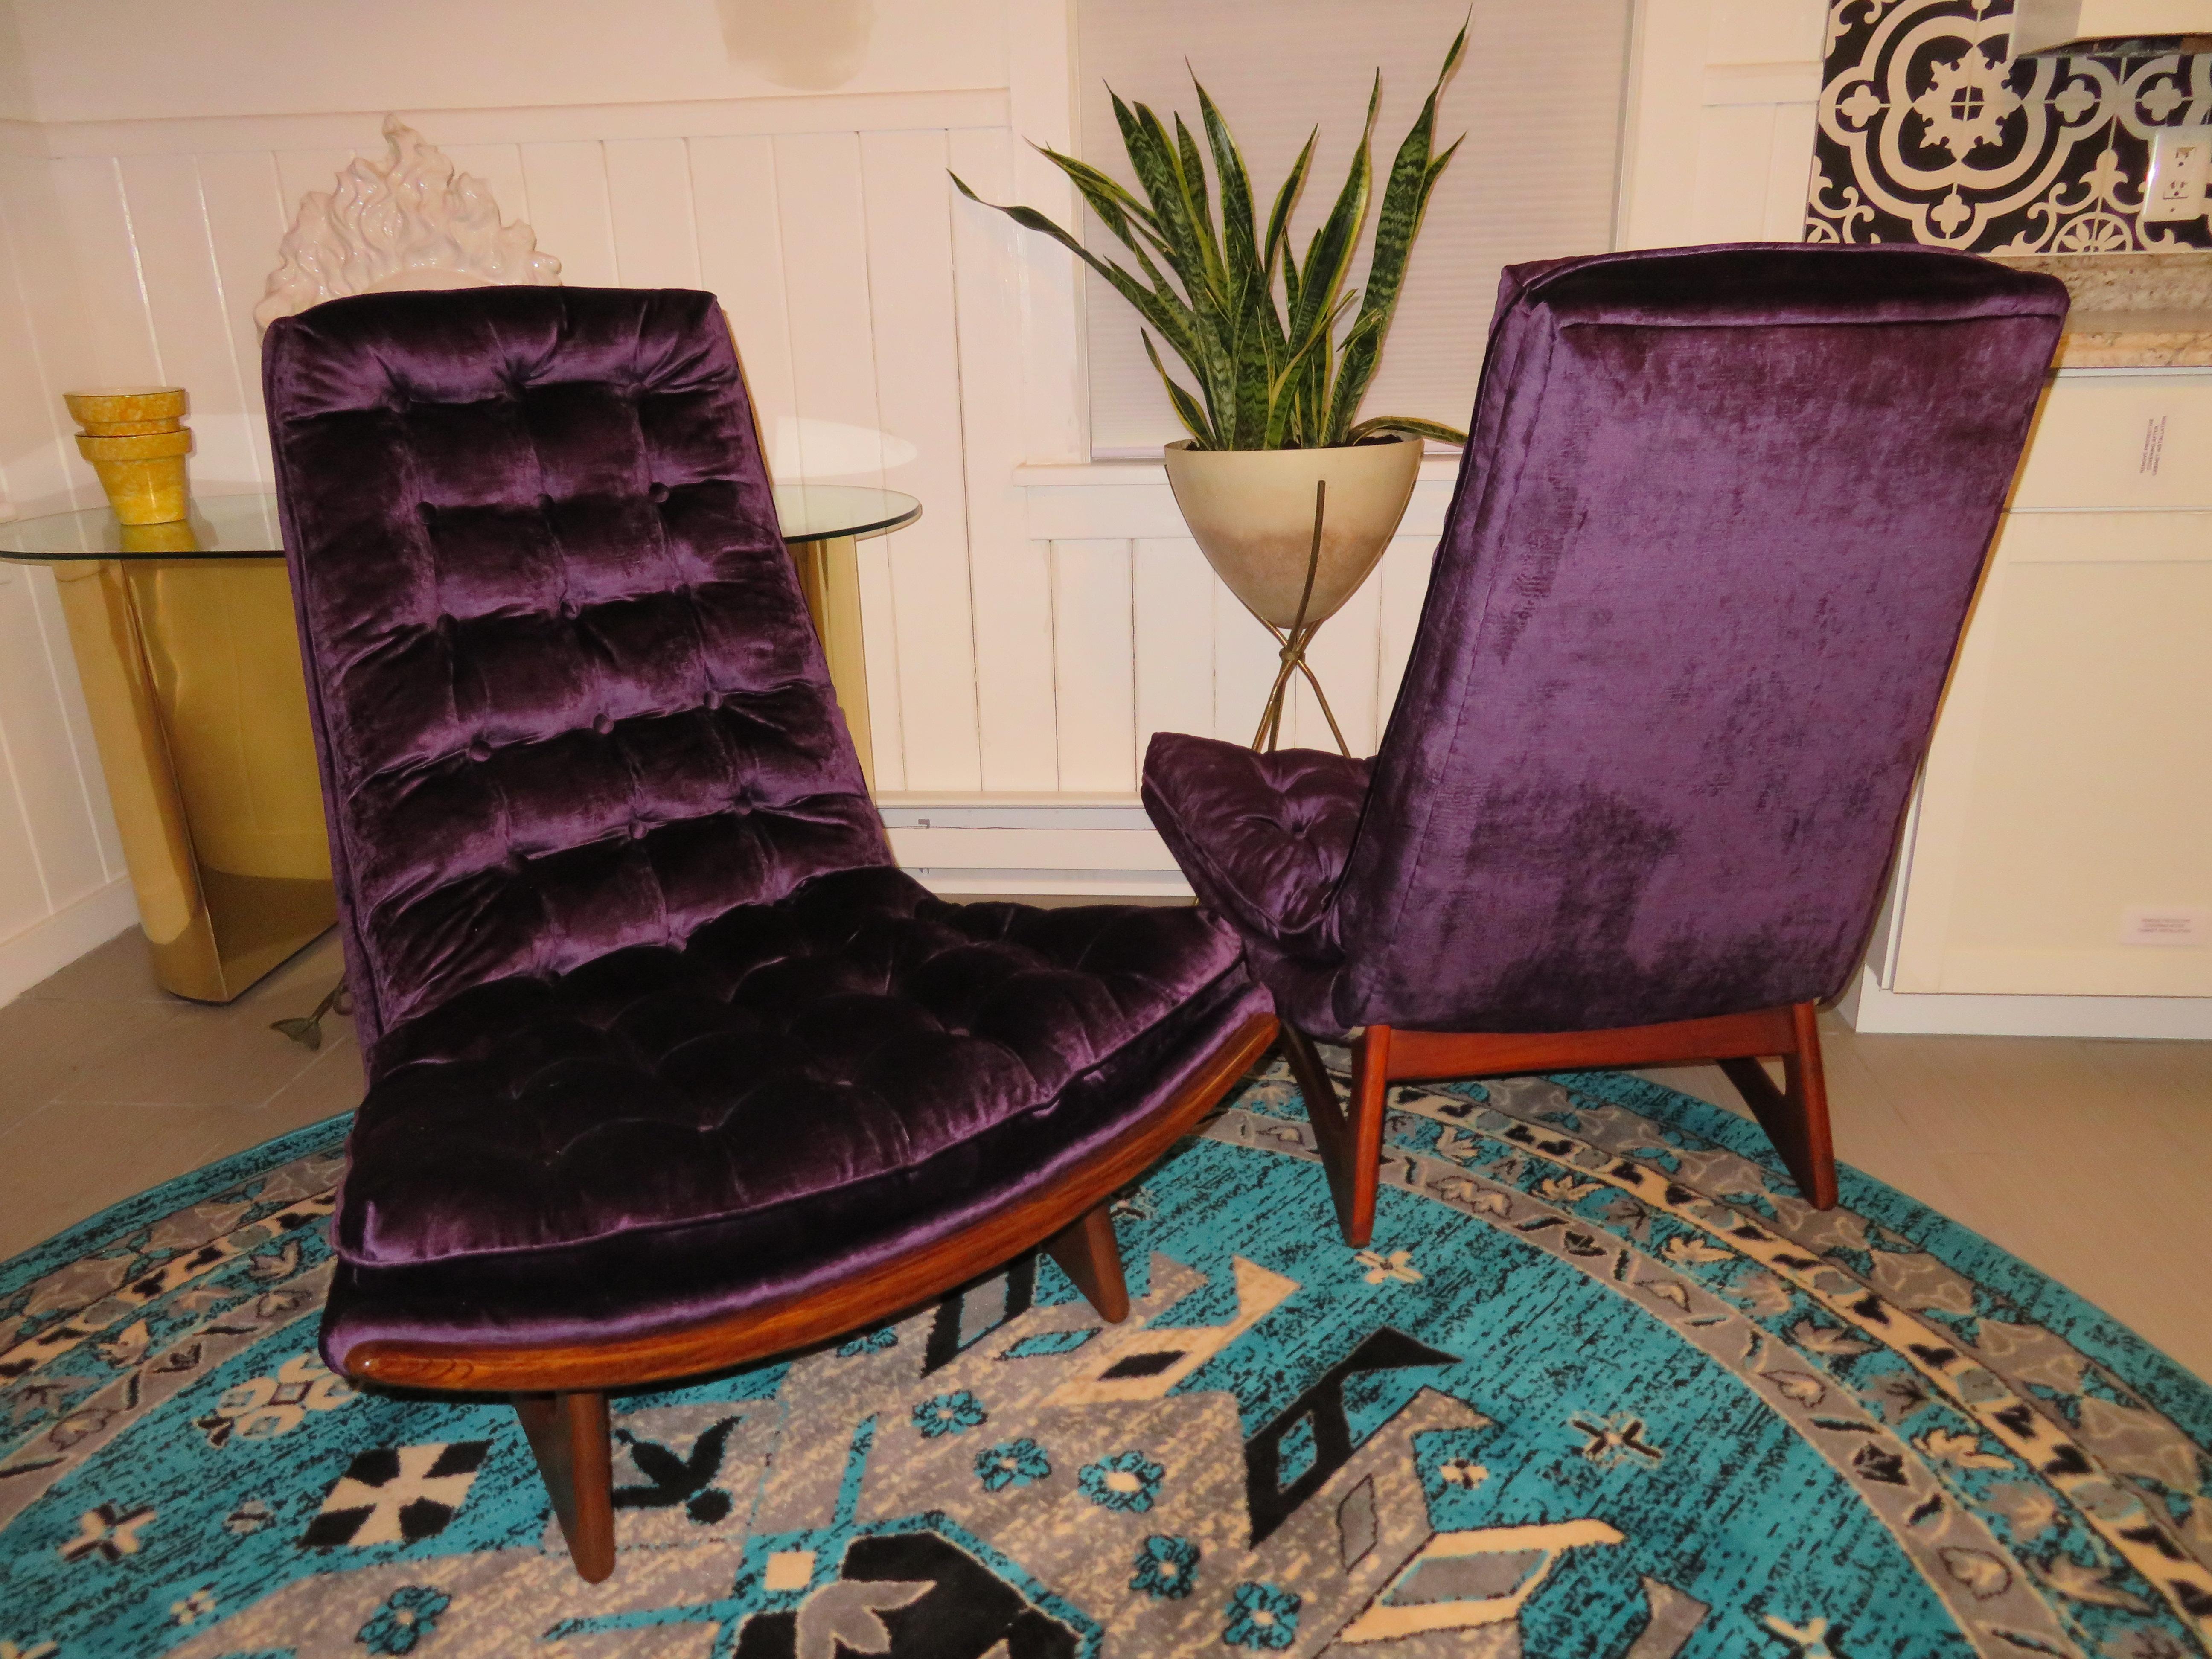 Magnificent pair of restored Adrian Pearsall tufted sculptural walnut scoop chairs. These rare chairs have been reupholstered in the most glorious jewelled tone purple velvet and look amazing. The sculptural walnut bases have been re-glued and also